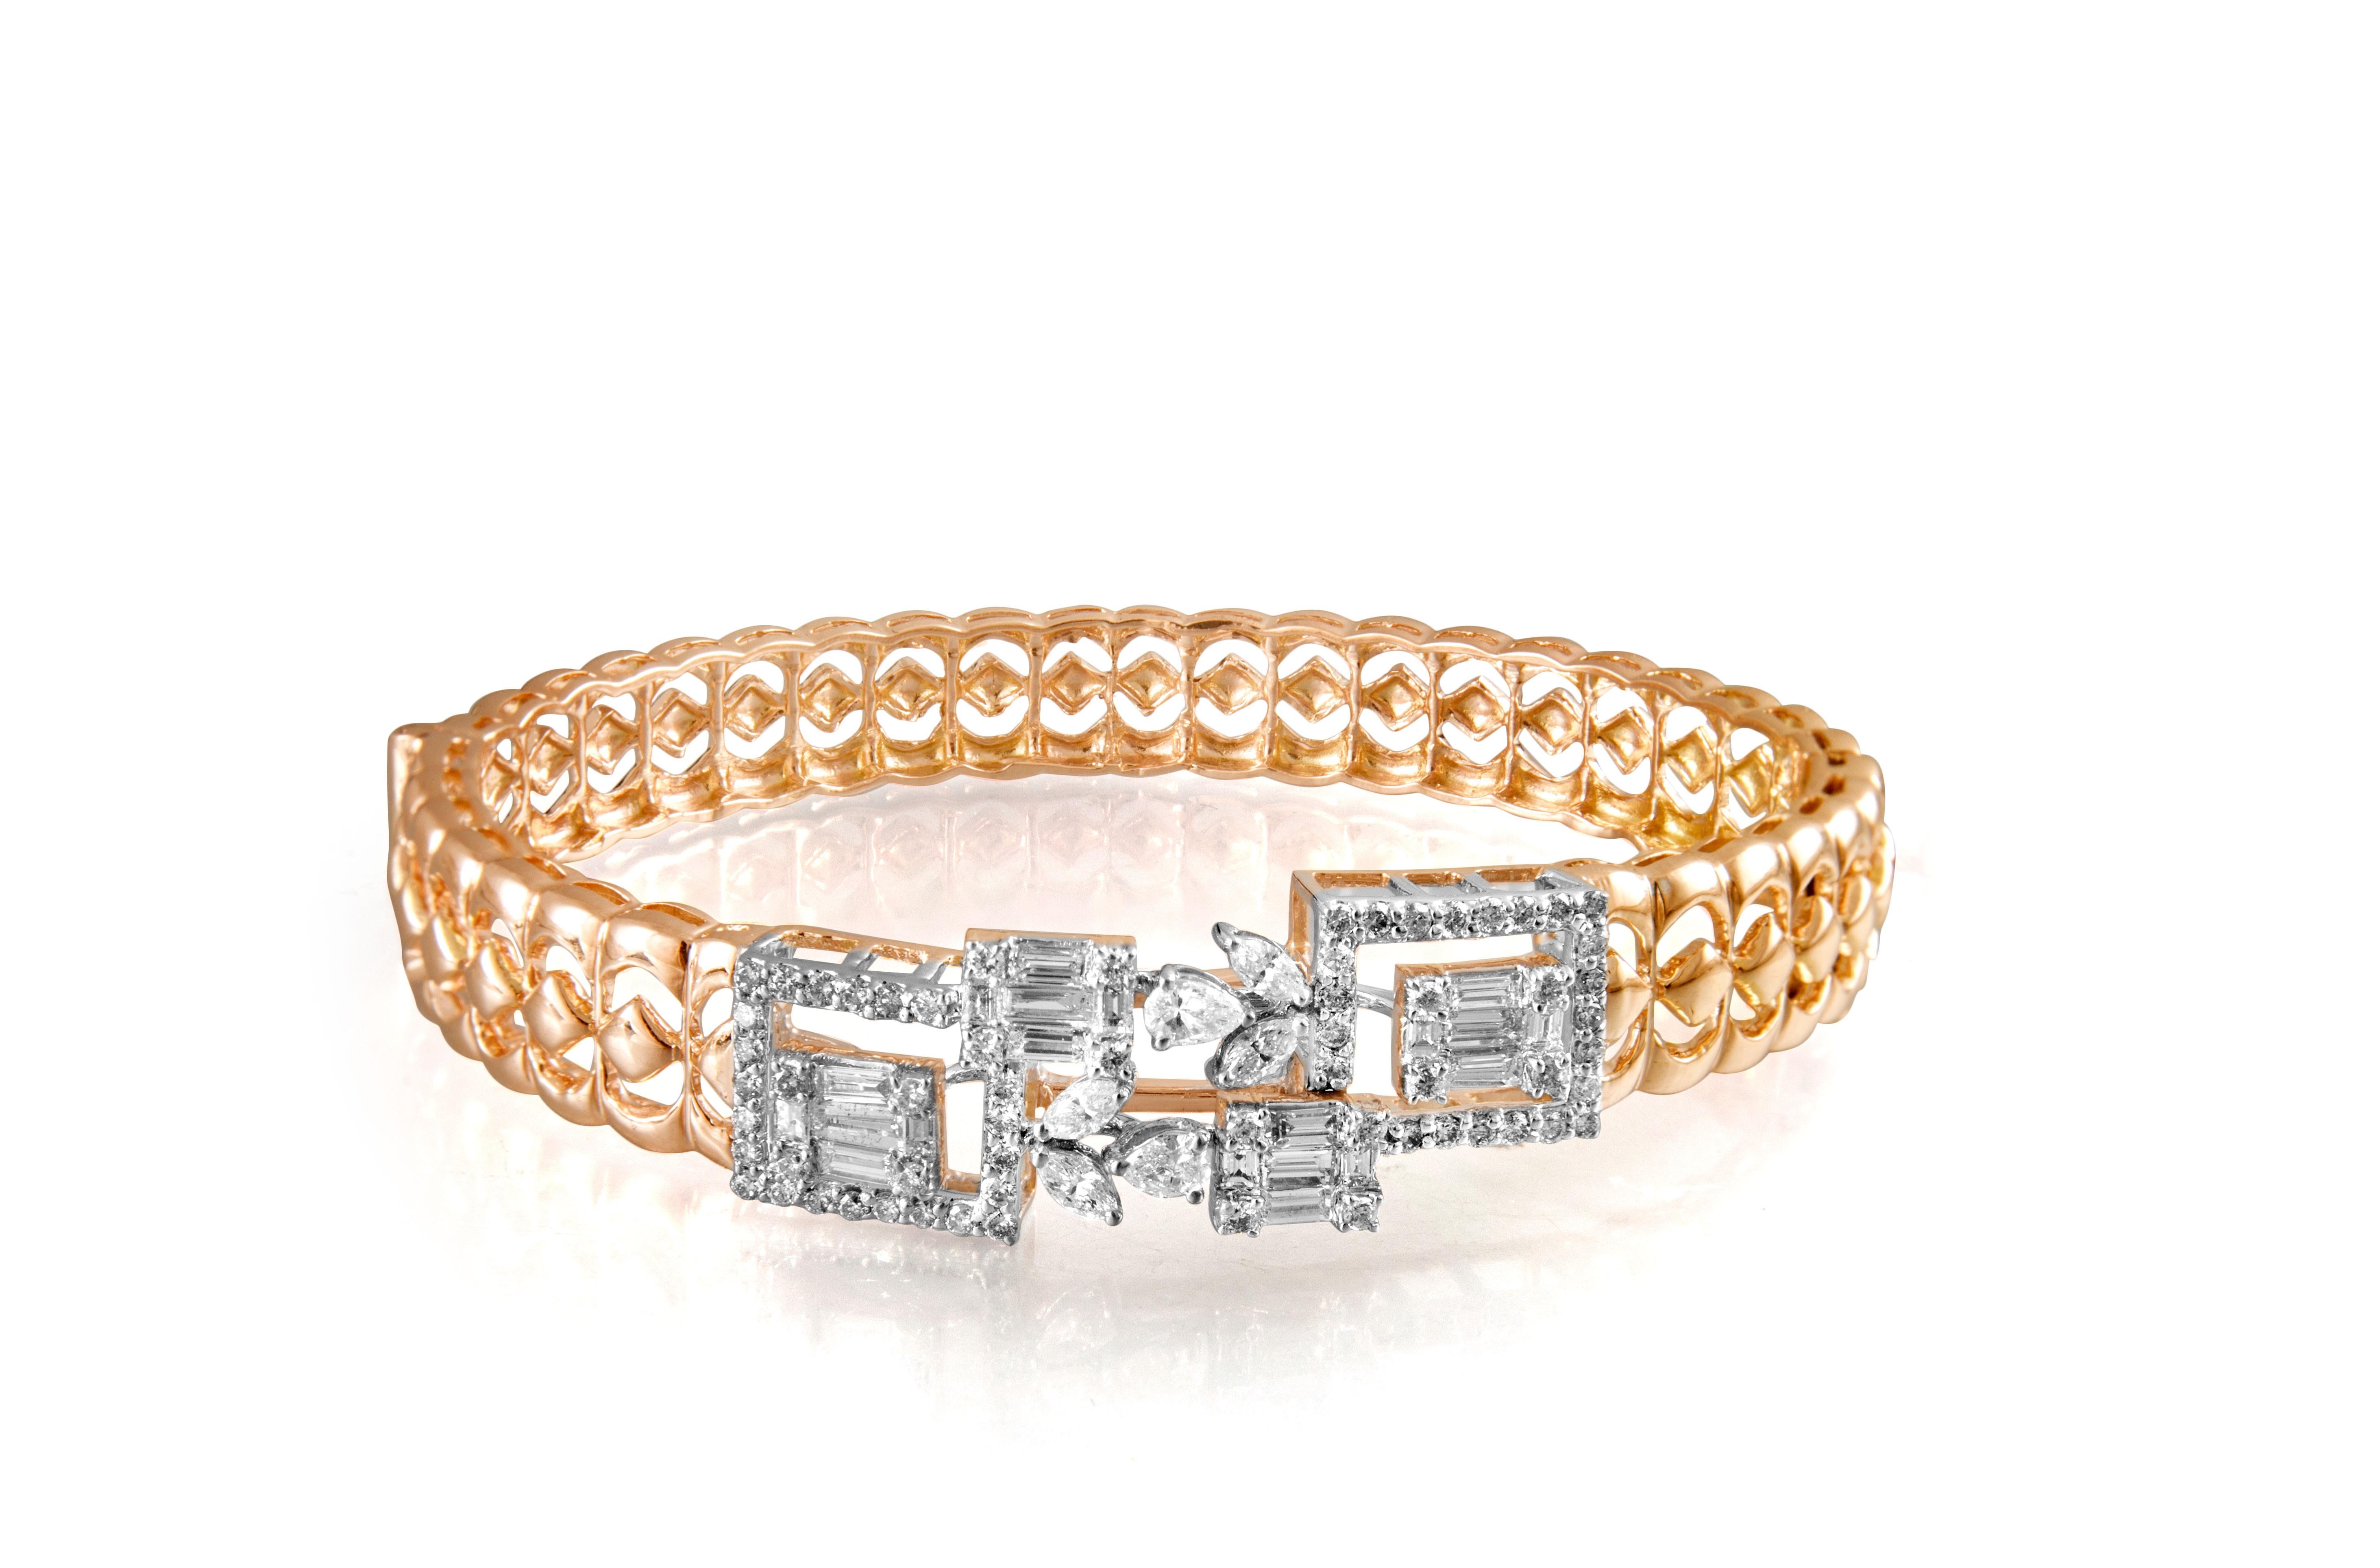 Diamond: 1.99 carats 
Gold: 18.760 grams 14 k
Colour: HI
Clarity: SI
Note: This piece is available on order 
This timeless bracelet sits perfectly on your wrist adding the perfect touch of glamour and sparkle 